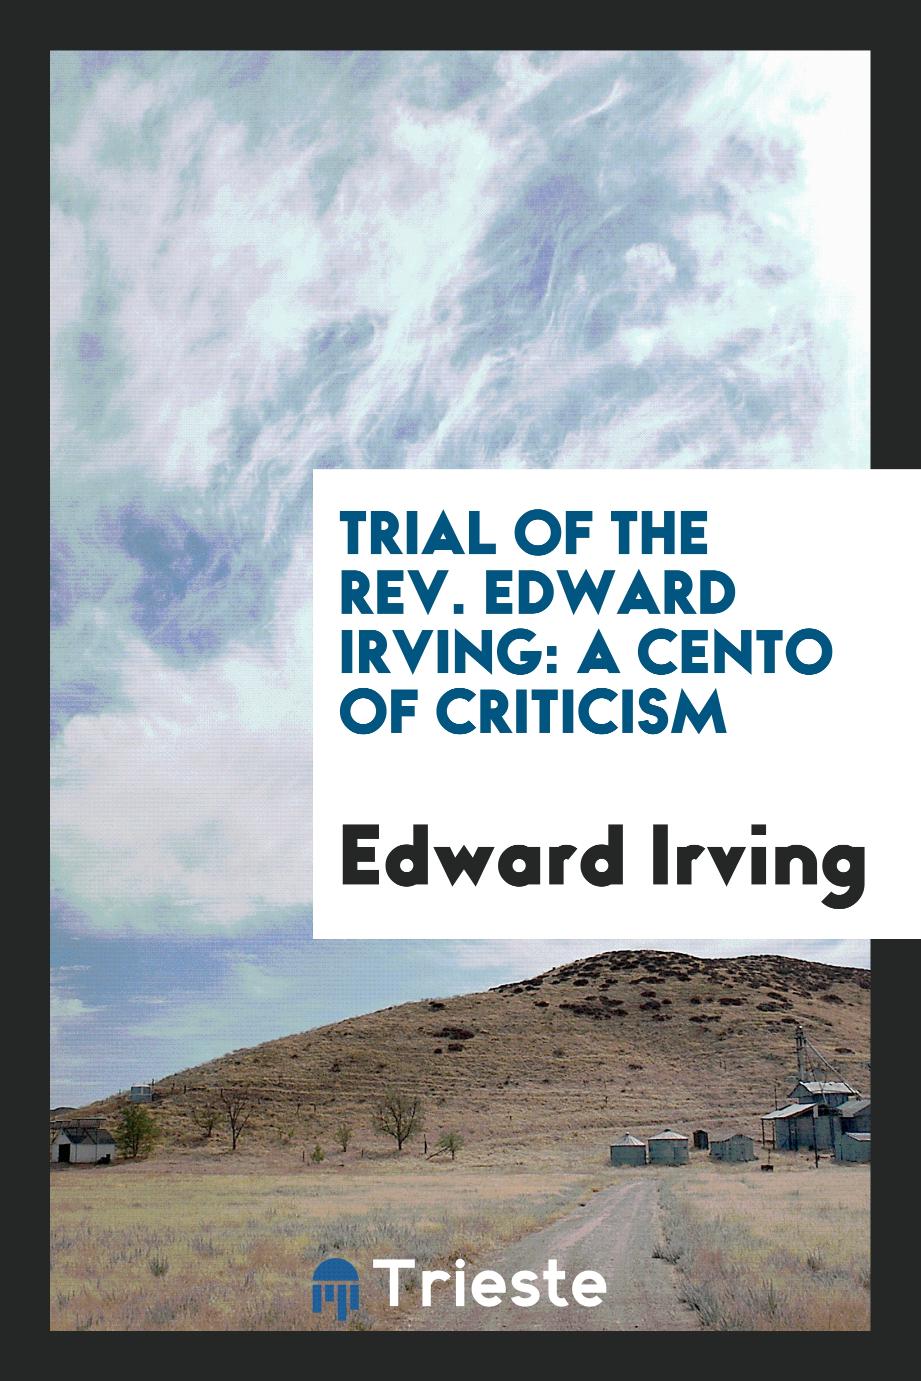 Trial of the Rev. Edward Irving: A Cento of Criticism